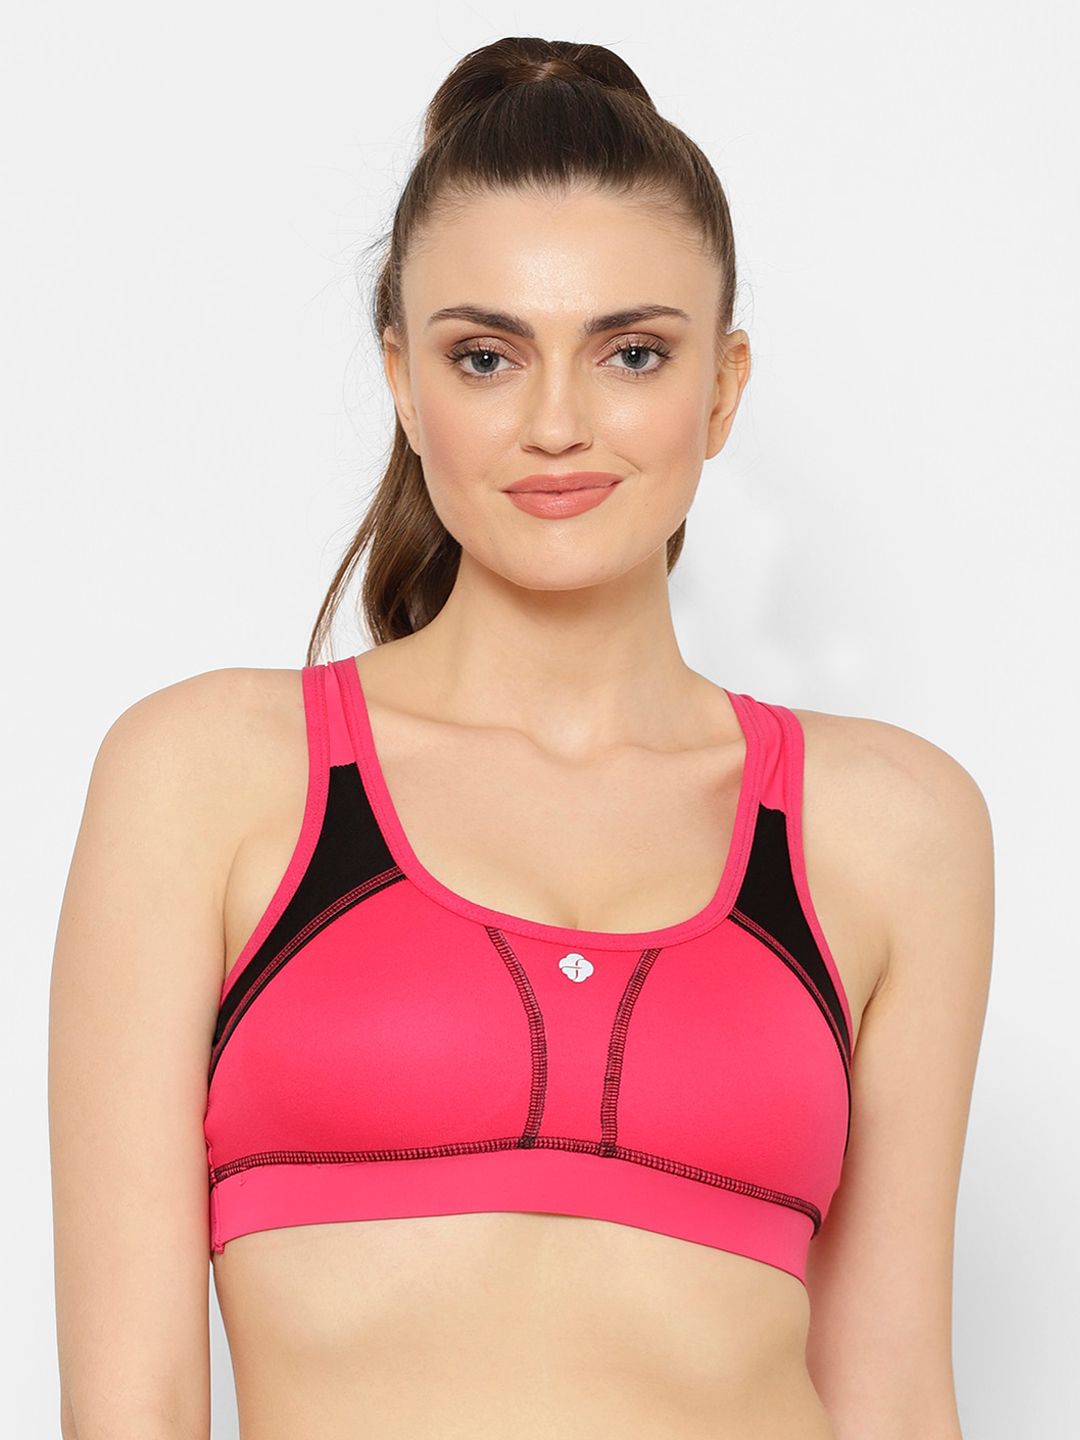 Floret Pink & Black Colourblocked Non-Wired Non Padded Workout Bra T3072 Price in India